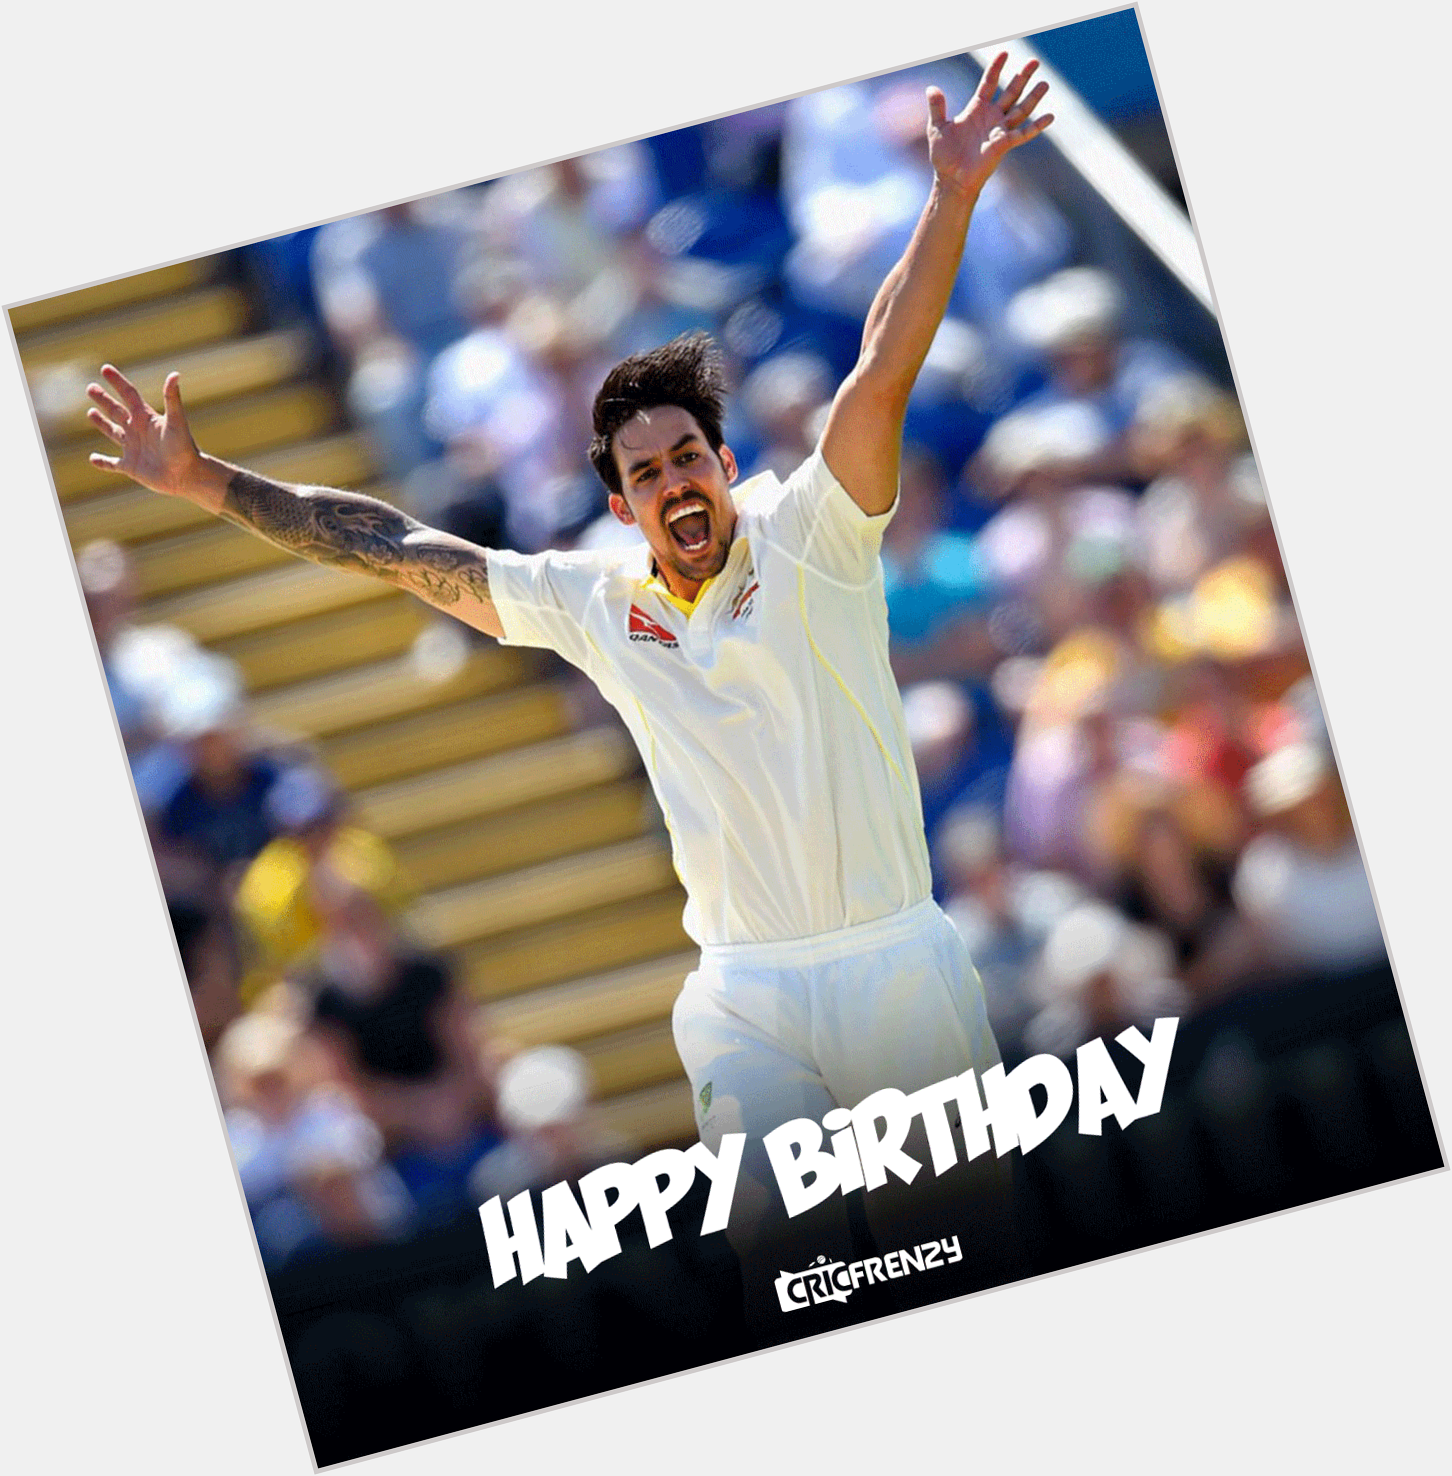  Considered to be one of the greatest fast bowlers of his era
Happy birthday Mitchell Johnson  